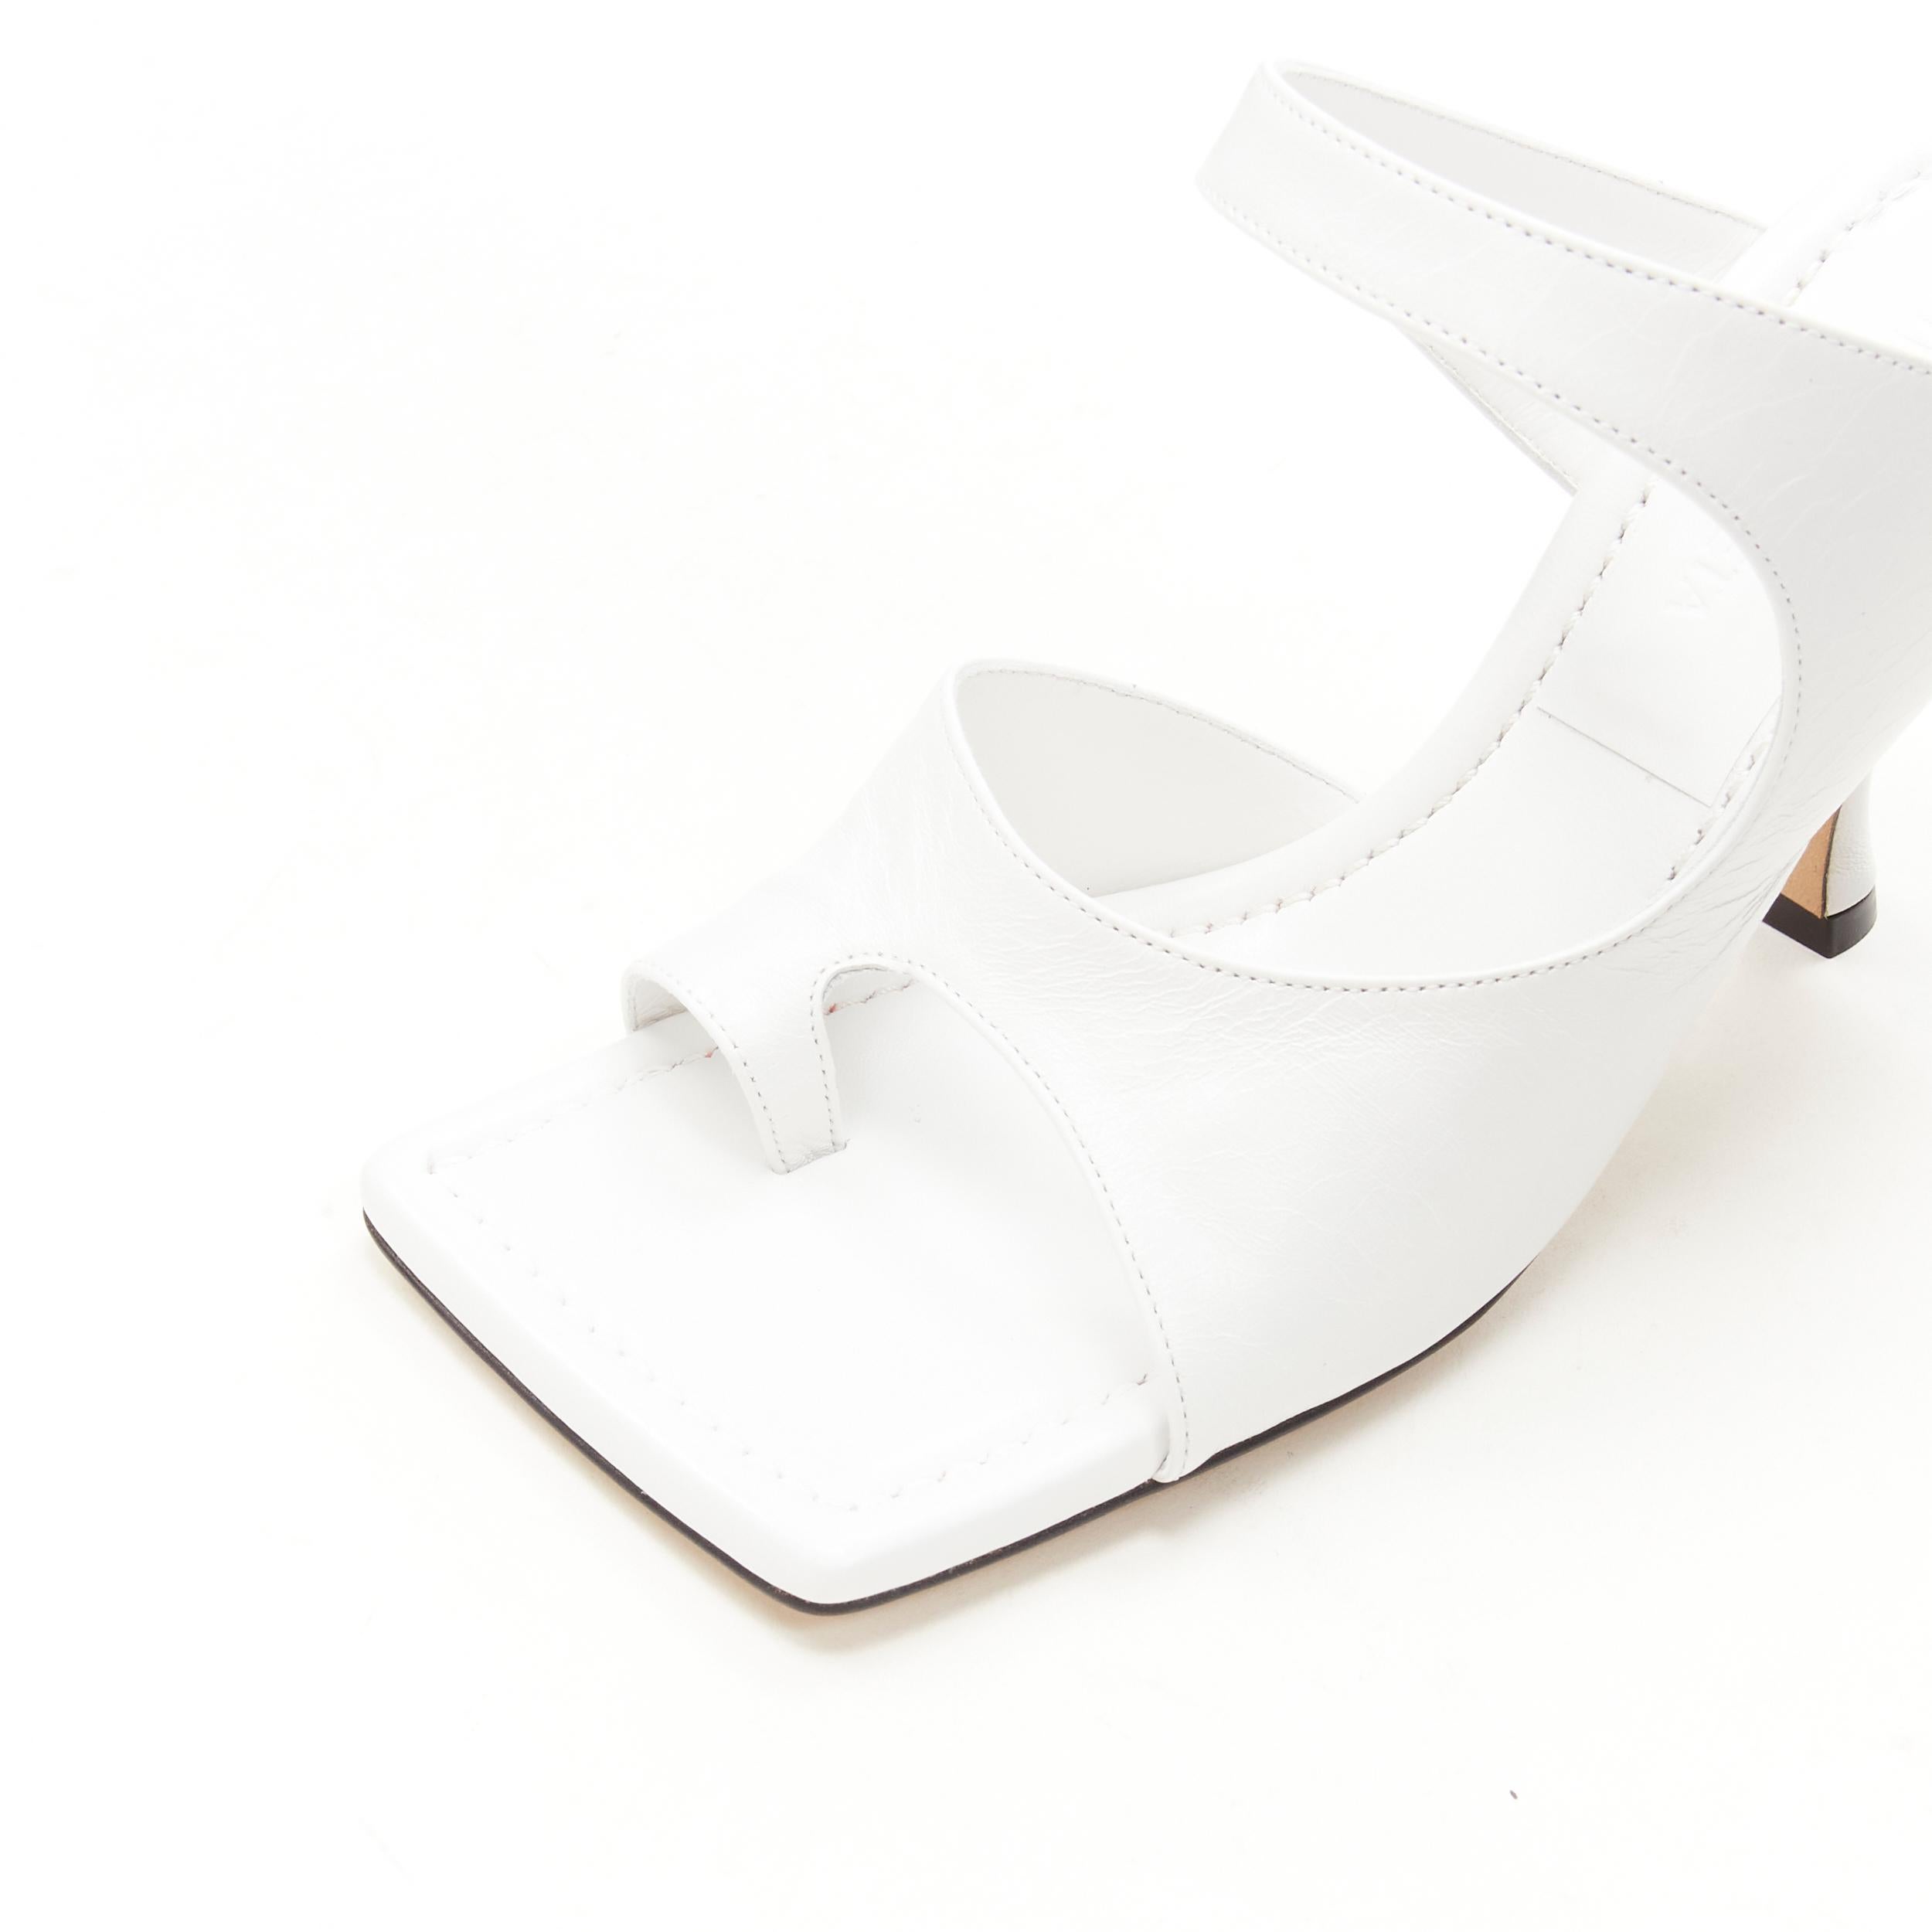 BOTTEGA VENETA Mule 90 optic white crunch lux leather square toe sandal EU36 In Excellent Condition For Sale In Hong Kong, NT